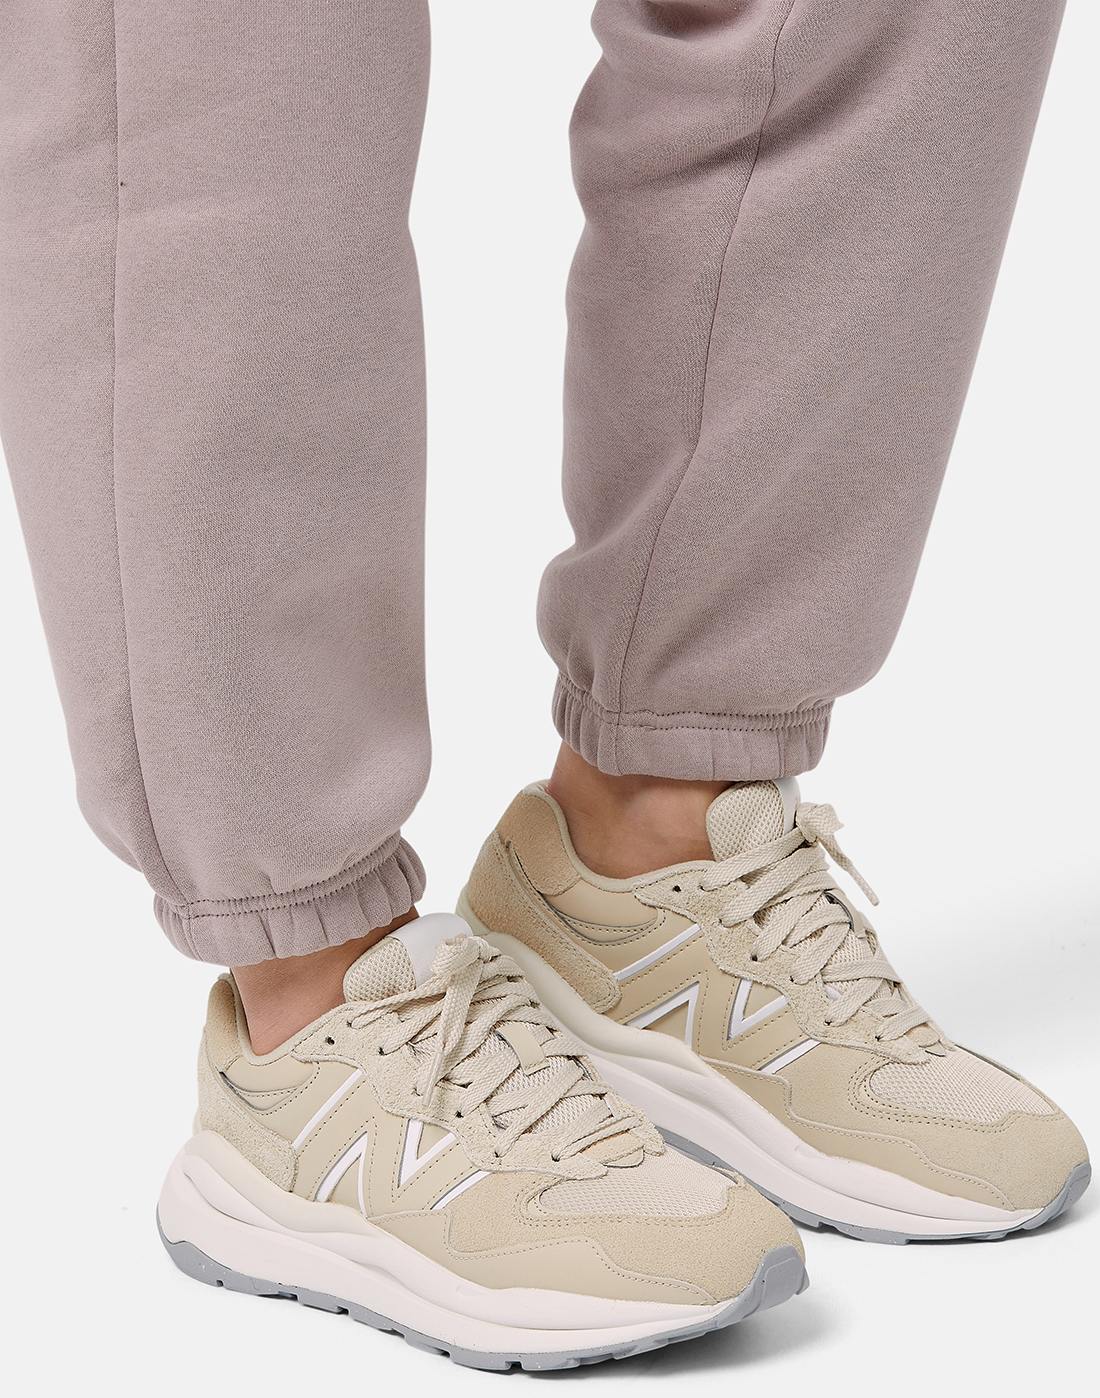 New Balance Womens 5740 Trainers - Cream | Life Style Sports IE